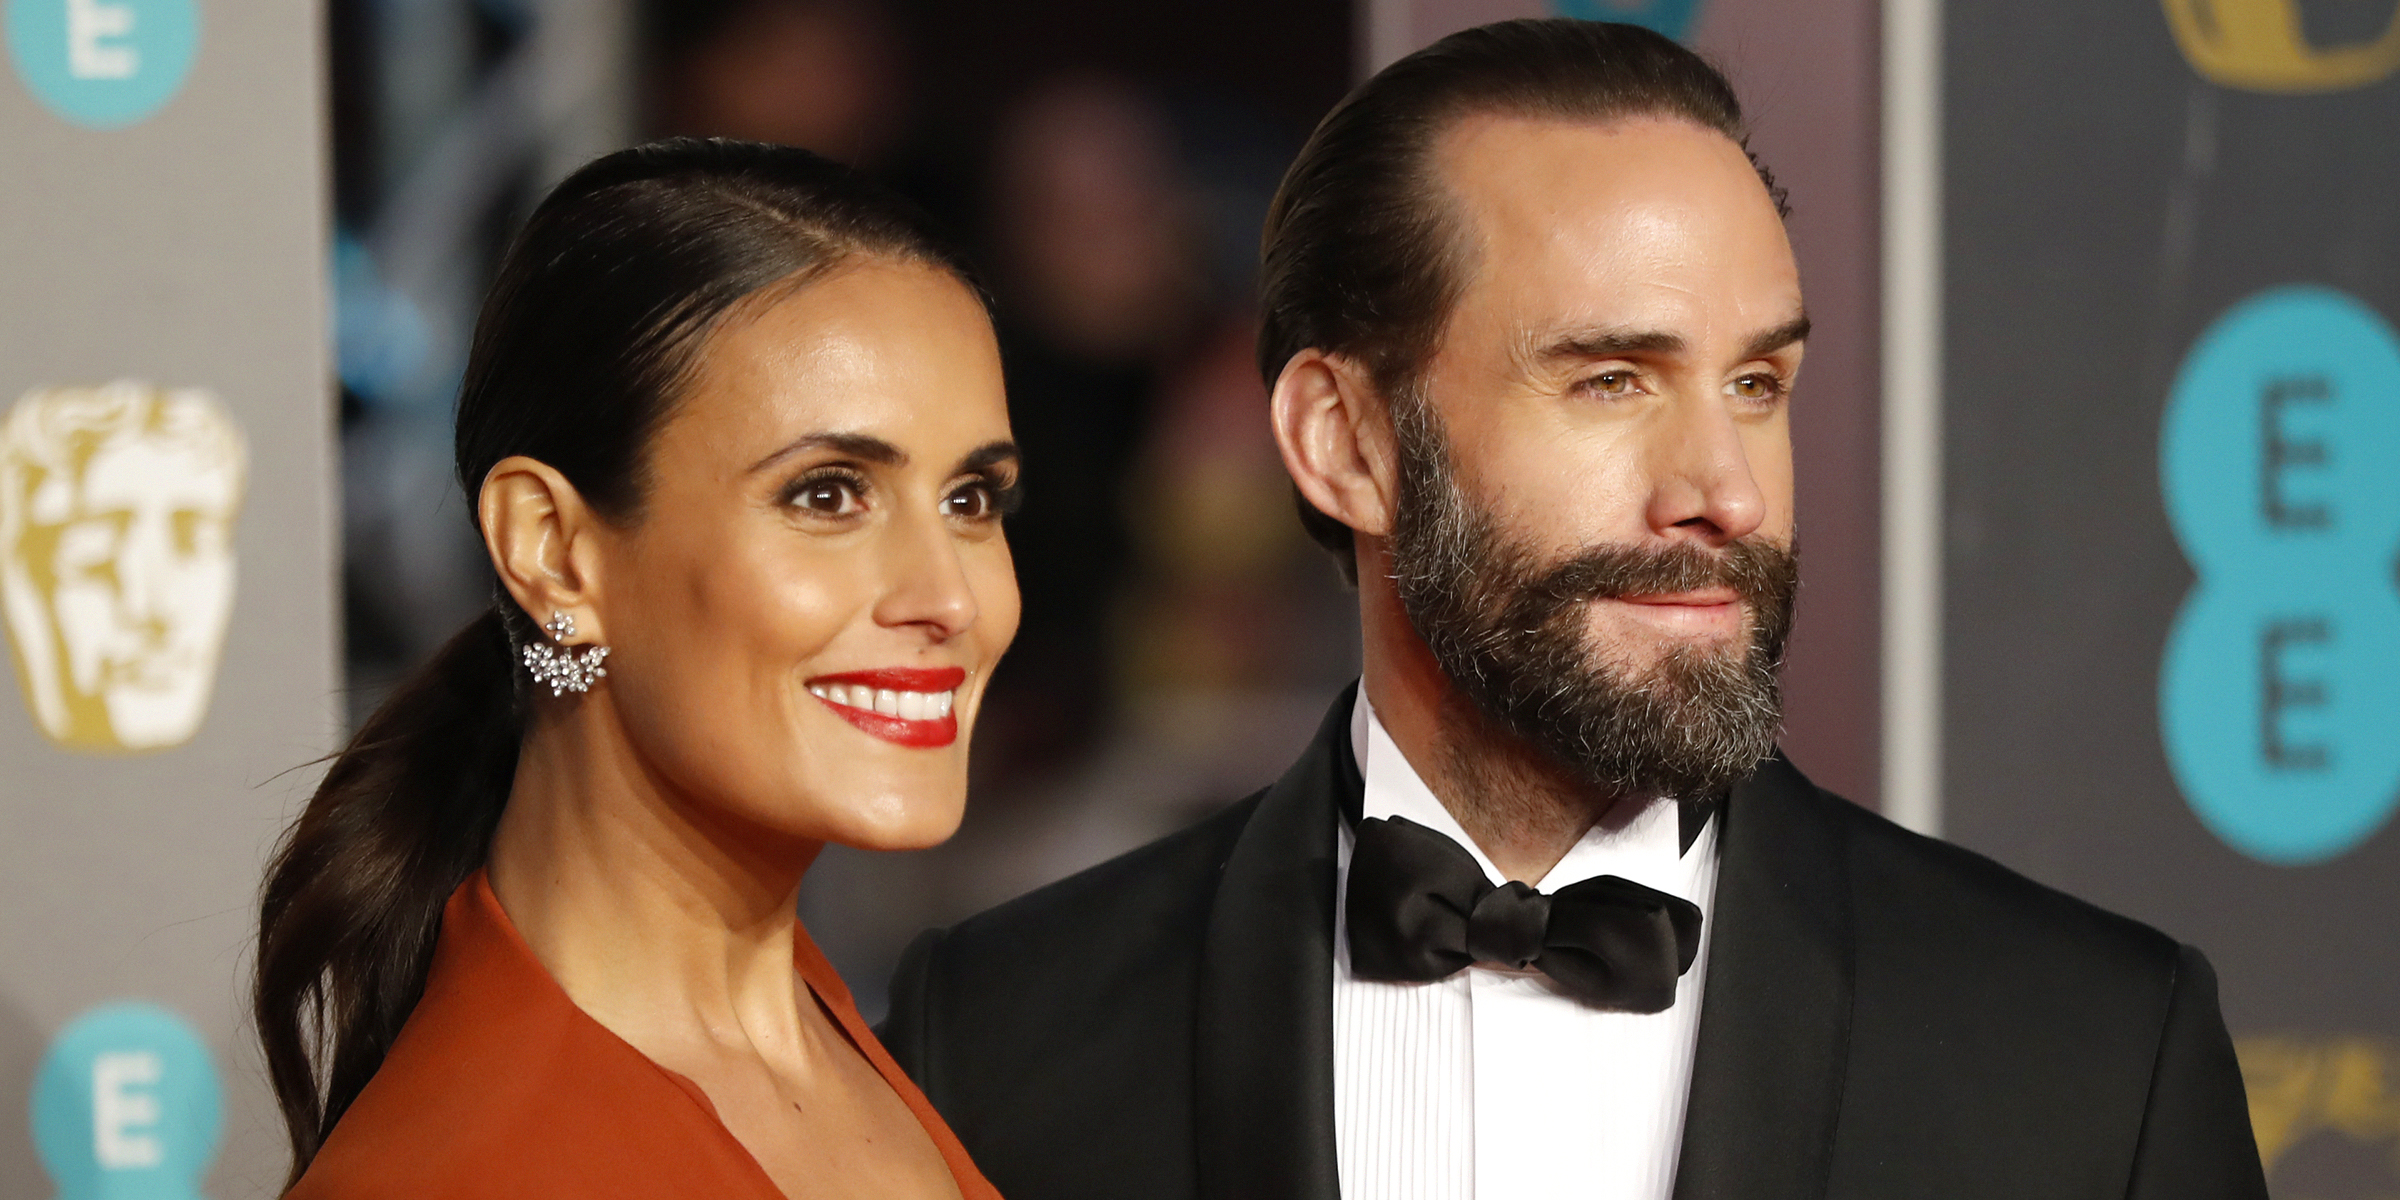 Maria Dolores Dieguez and Joseph Fiennes | Source: Getty Images